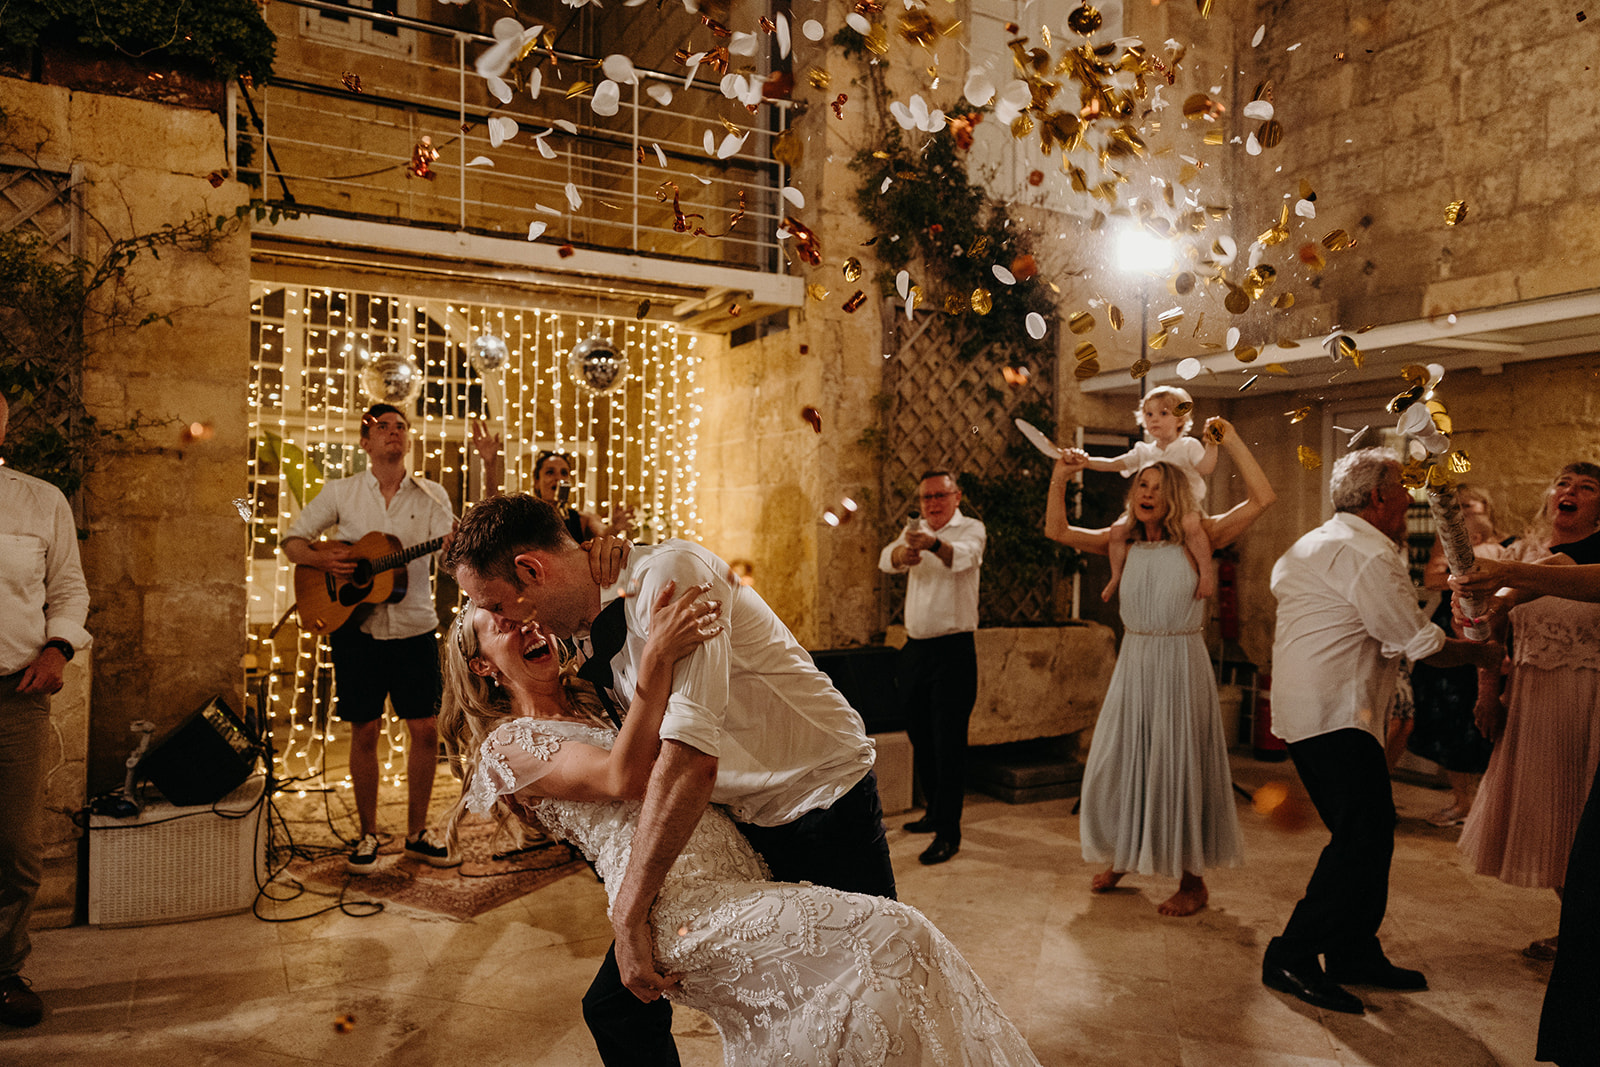 Confetti being throw in air as groom dances with bride